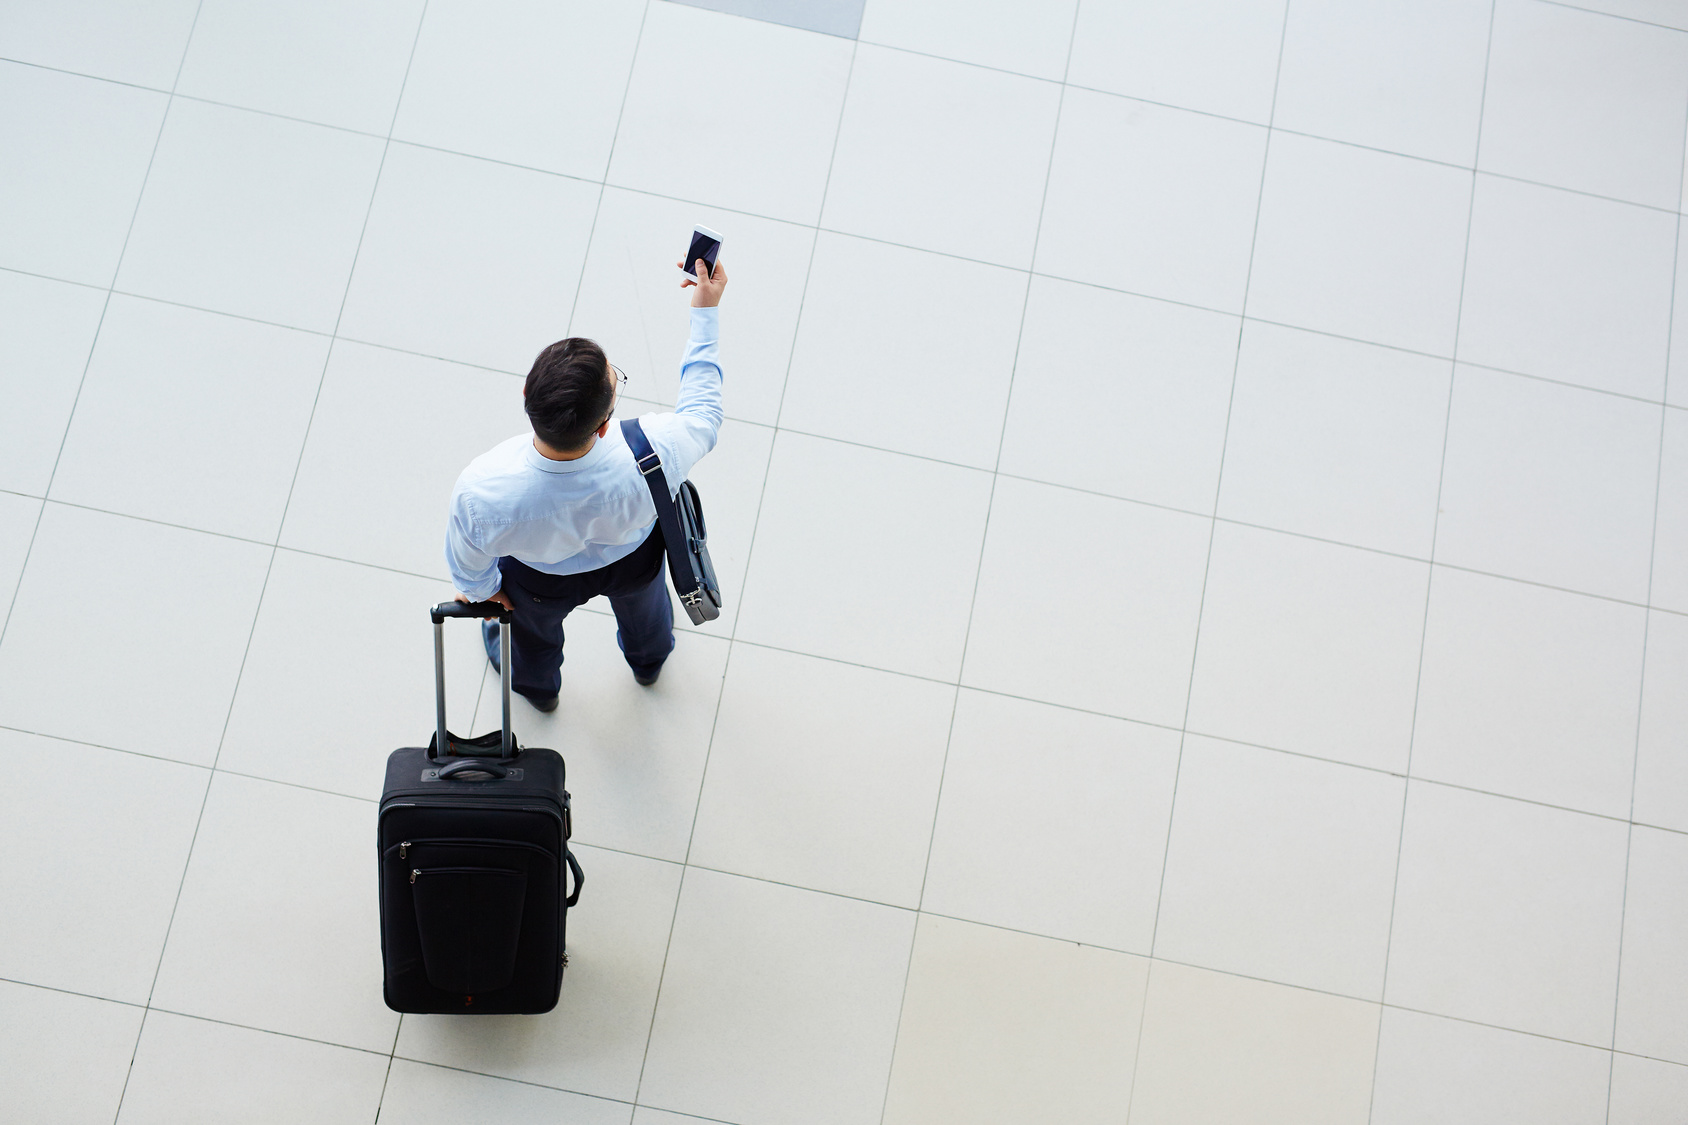 6 Tips for Making a Good Impression on Your Business Trip